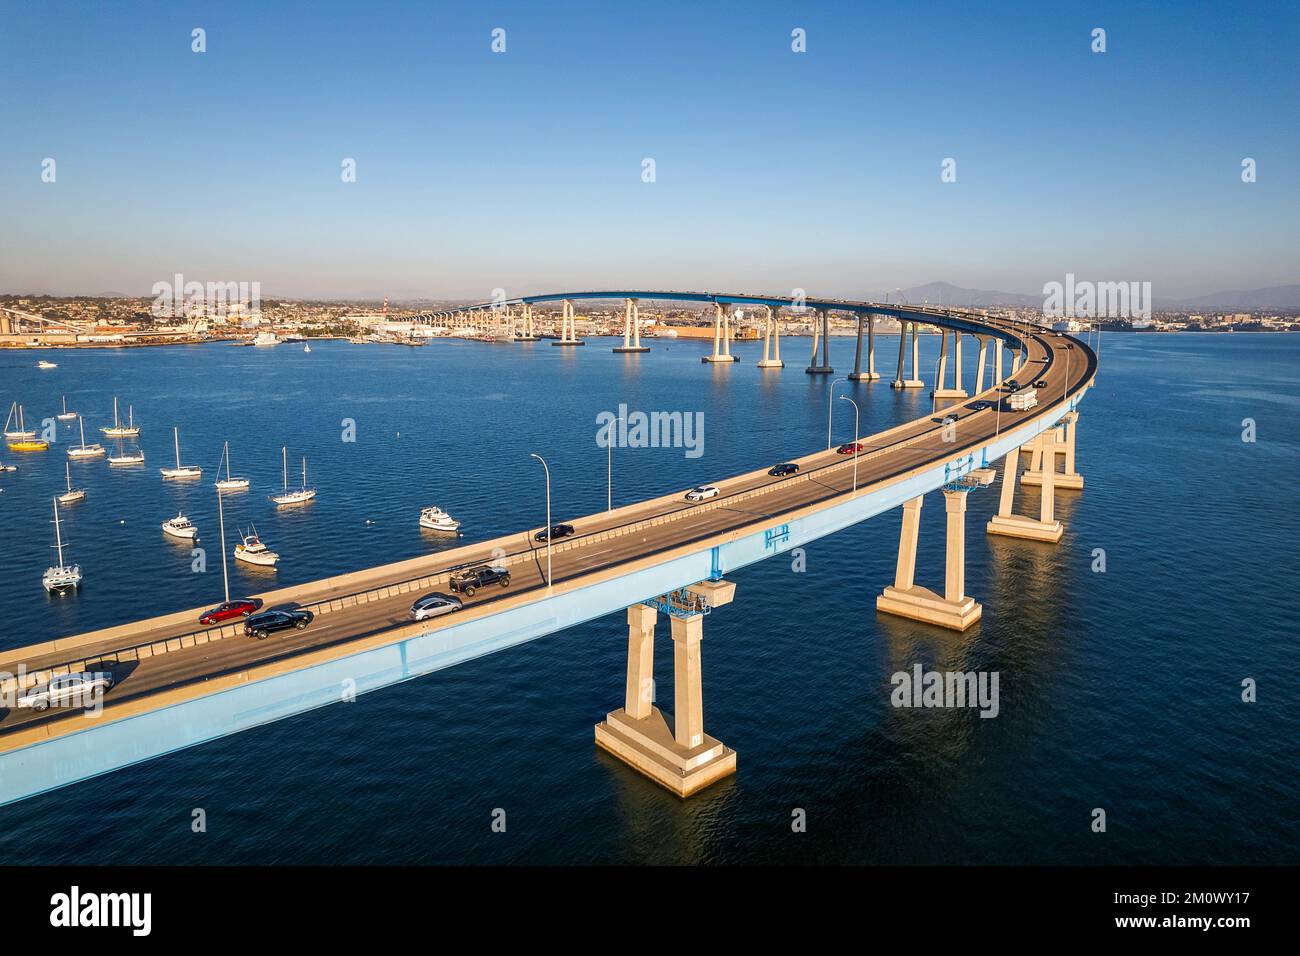 Aerial view of Coronado Bridge in San Diego bay in southern California on a warm sunny day with boats in the bay and cars crossing the bridge Stock Photo